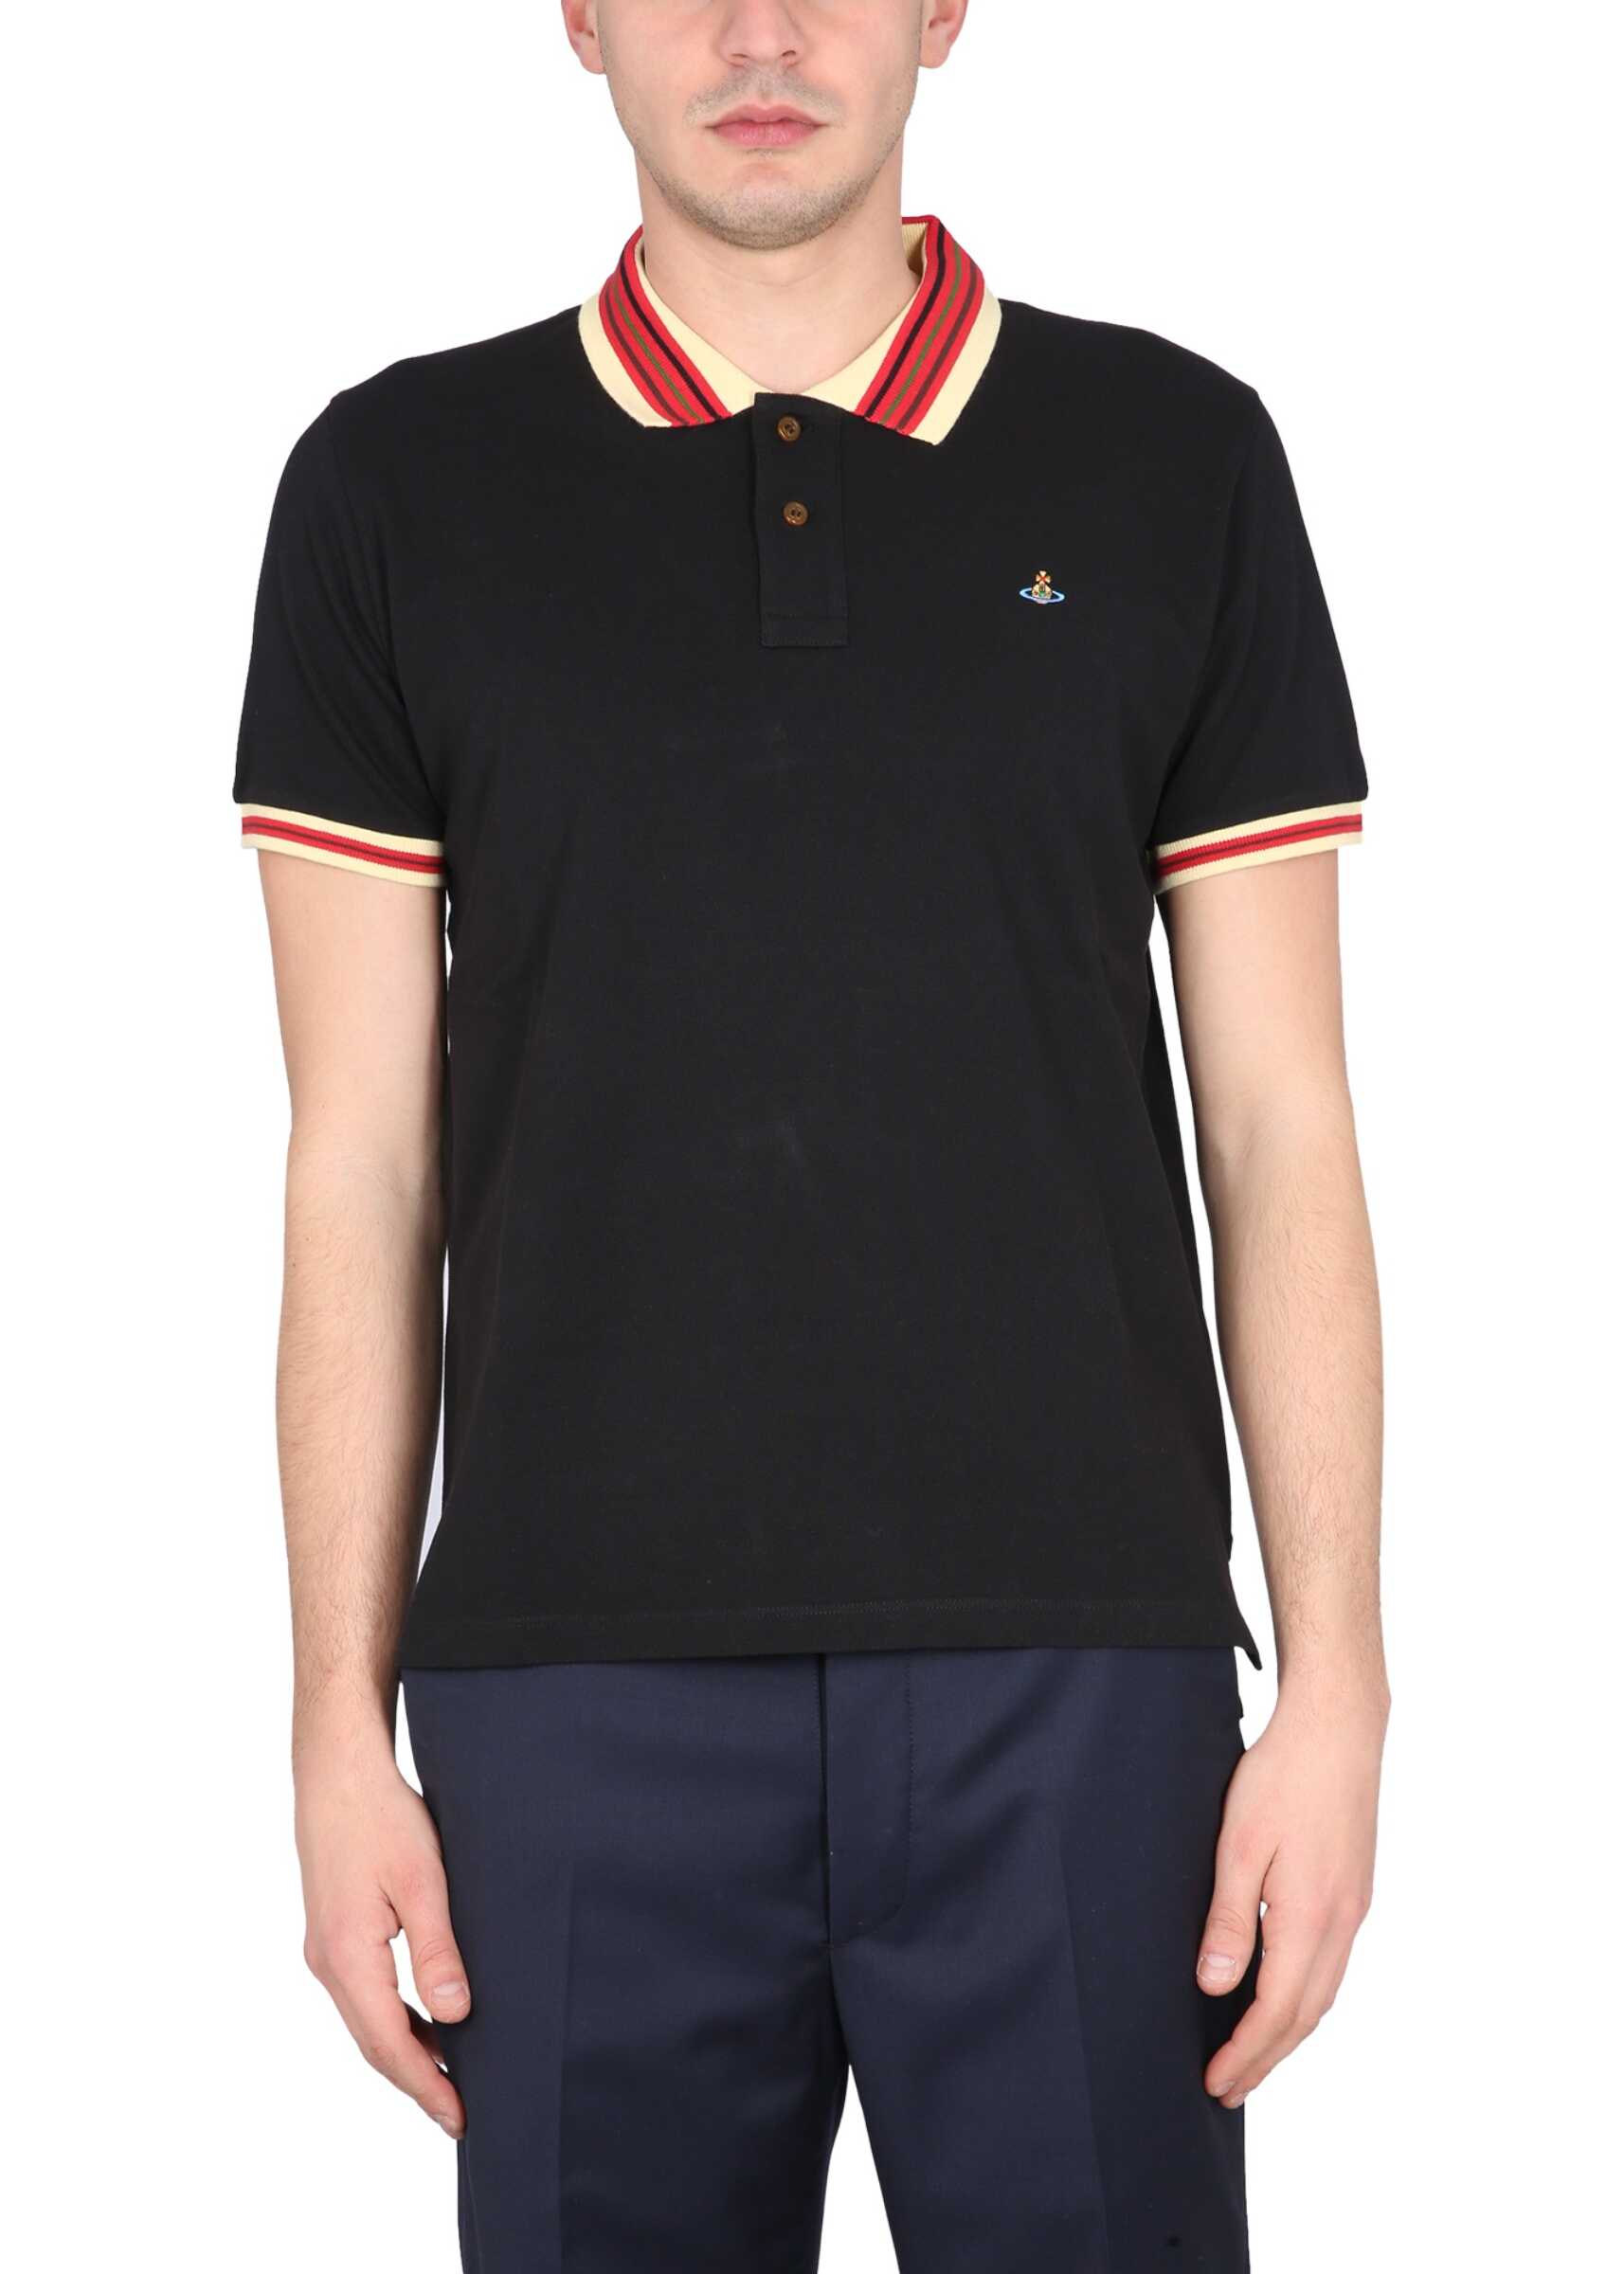 Vivienne Westwood Polo Shirt With Orb Embroidery BLACK